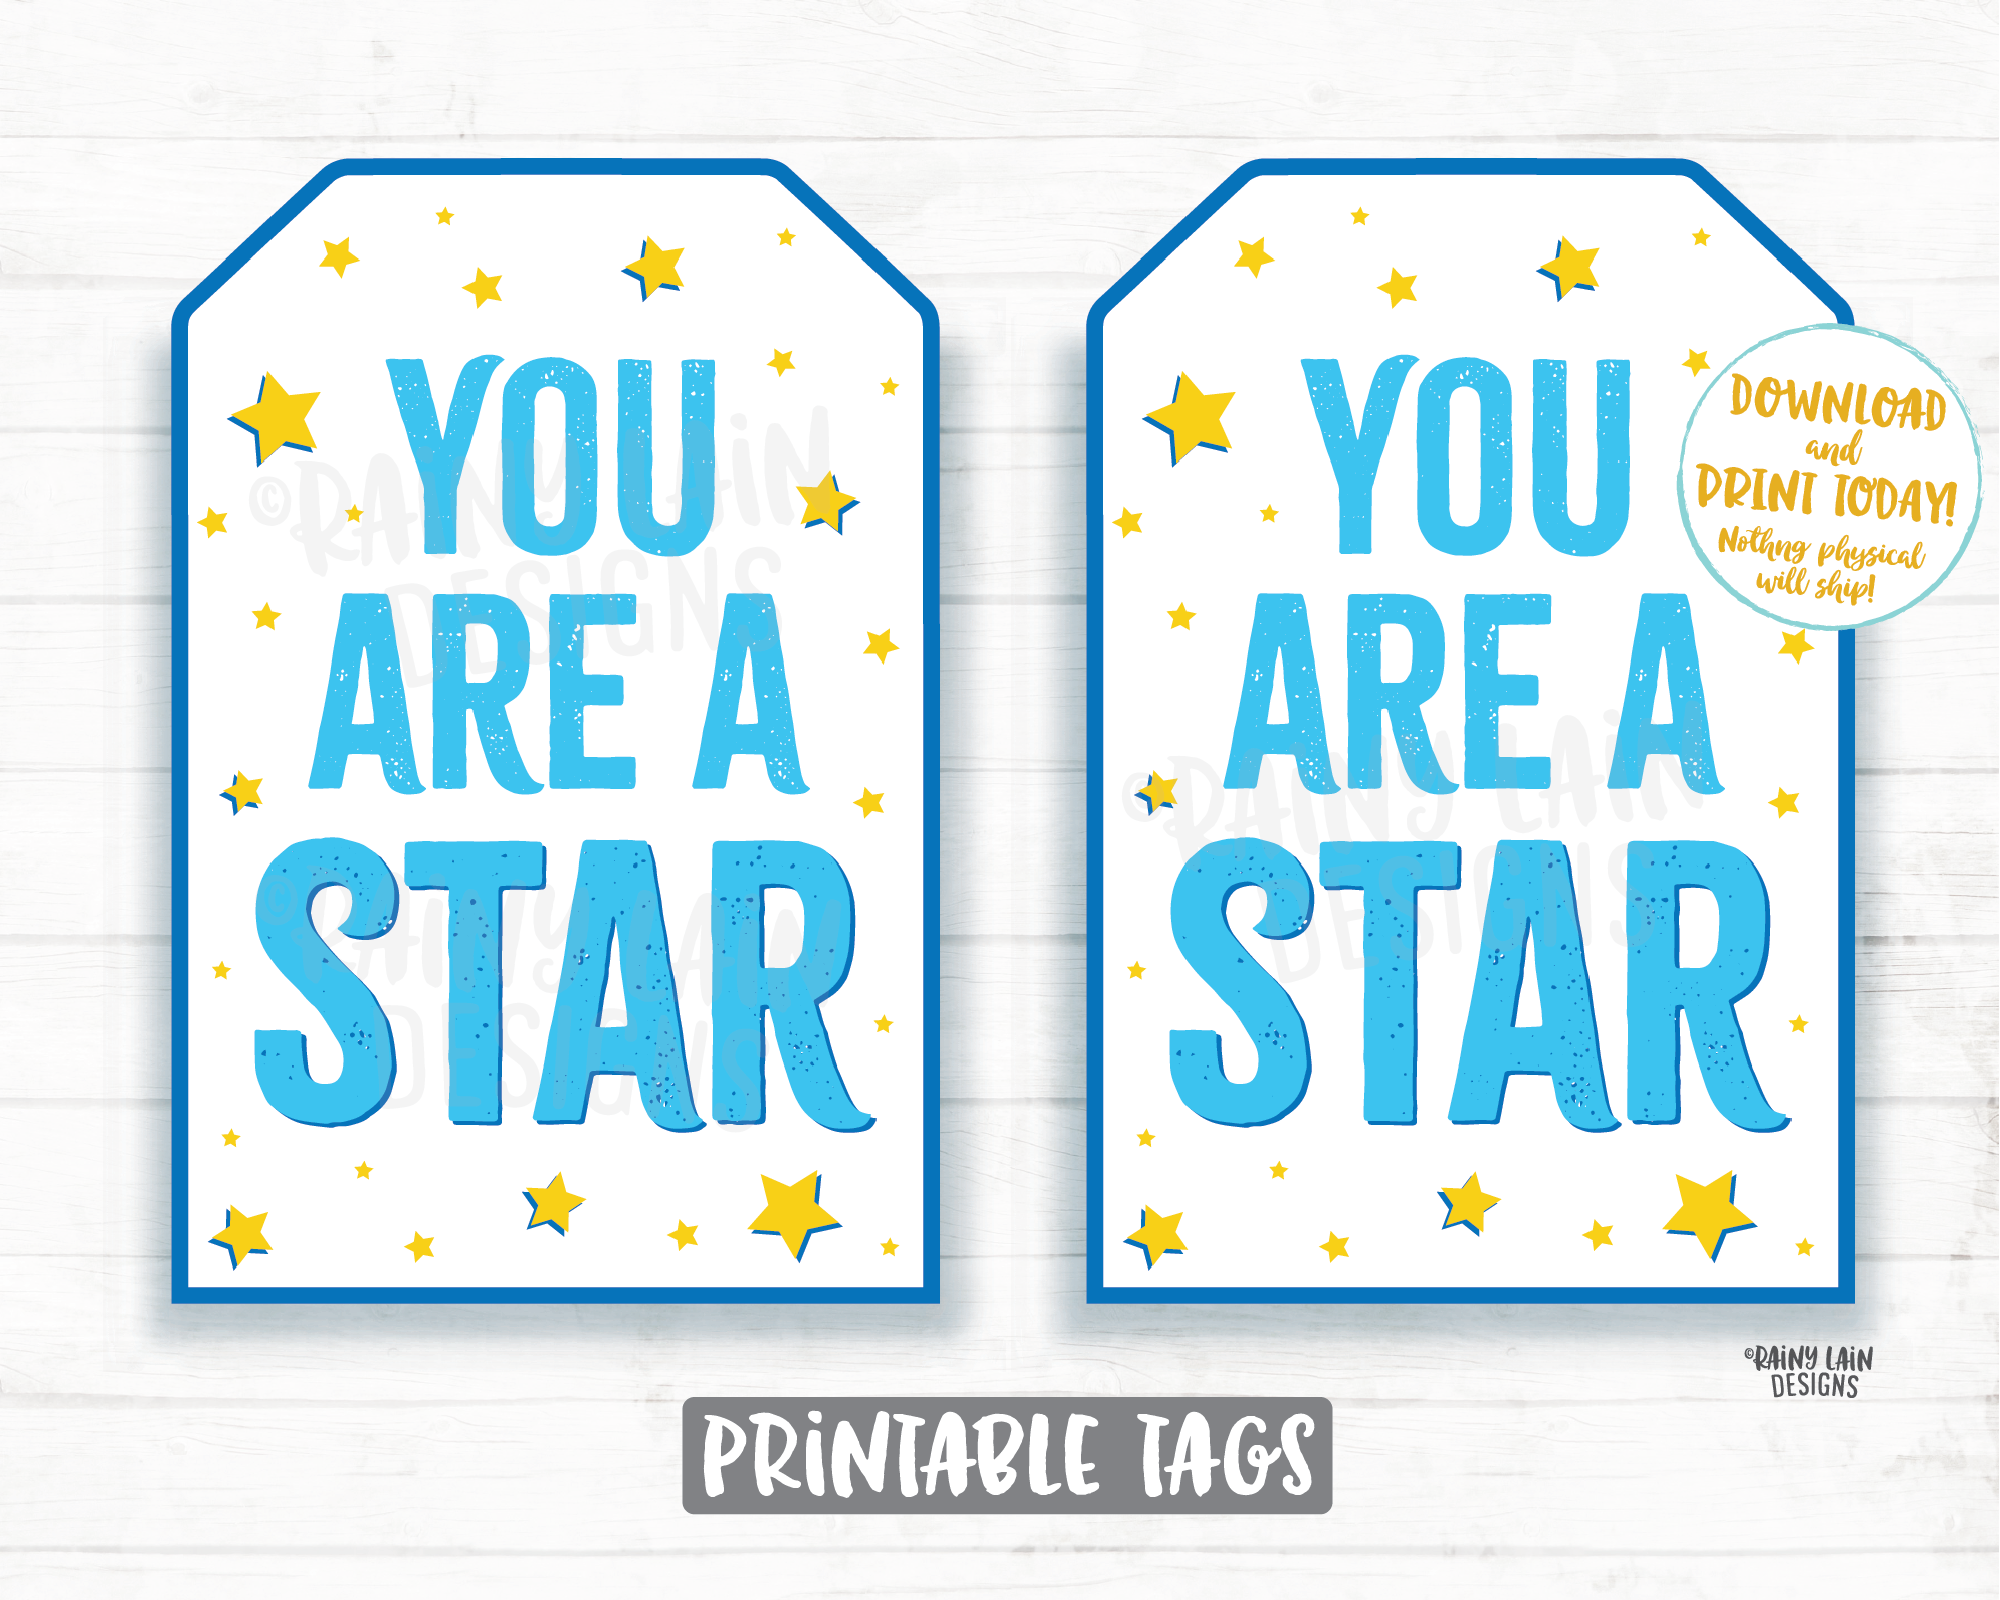 You are a star tag Printable Appreciation Gift Tag, Essential Worker, Principal Thank you, Employee Co-Worker, Student, Teacher Gift, Friend